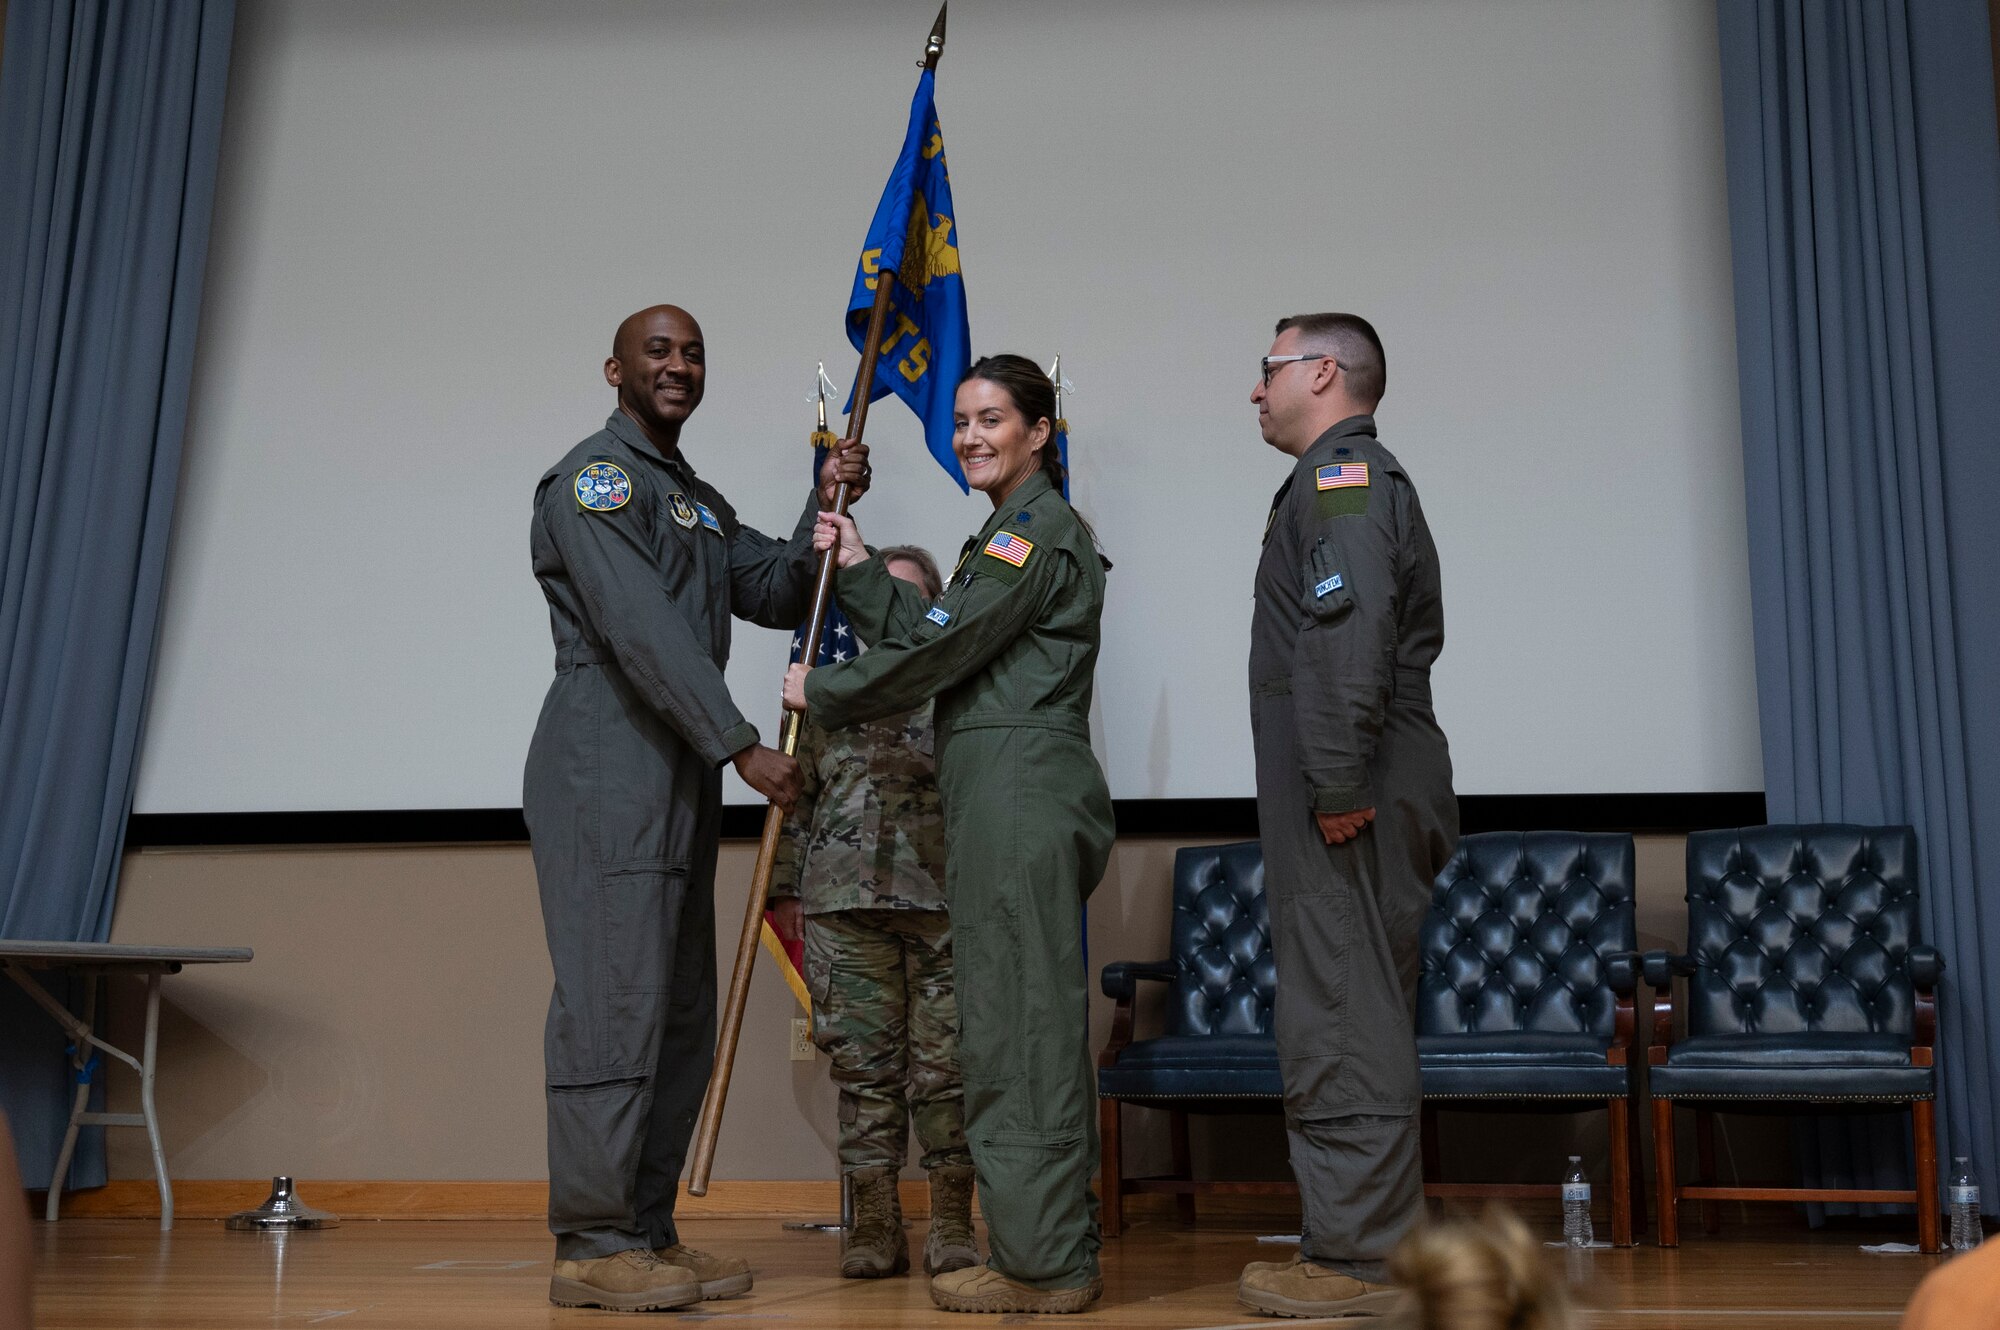 U.S. Air Force Lt. Col. Christine Van Weezendonk, former 96th Flying Training Squadron commander, turns over the 96th FTS guidon to Col. Michael McMillan, 340th Flying Training Group director of operations, during the 96th FTS change of command ceremony at Laughlin Air Force Base, Texas, May 10, 2024. As commander, Weezendonk lead the recruitment, training and development of a 75-person Associate Reserve Instructor Pilot Corps and support personnel. (U.S. Air Force photo by Senior Airman Kailee Reynolds)